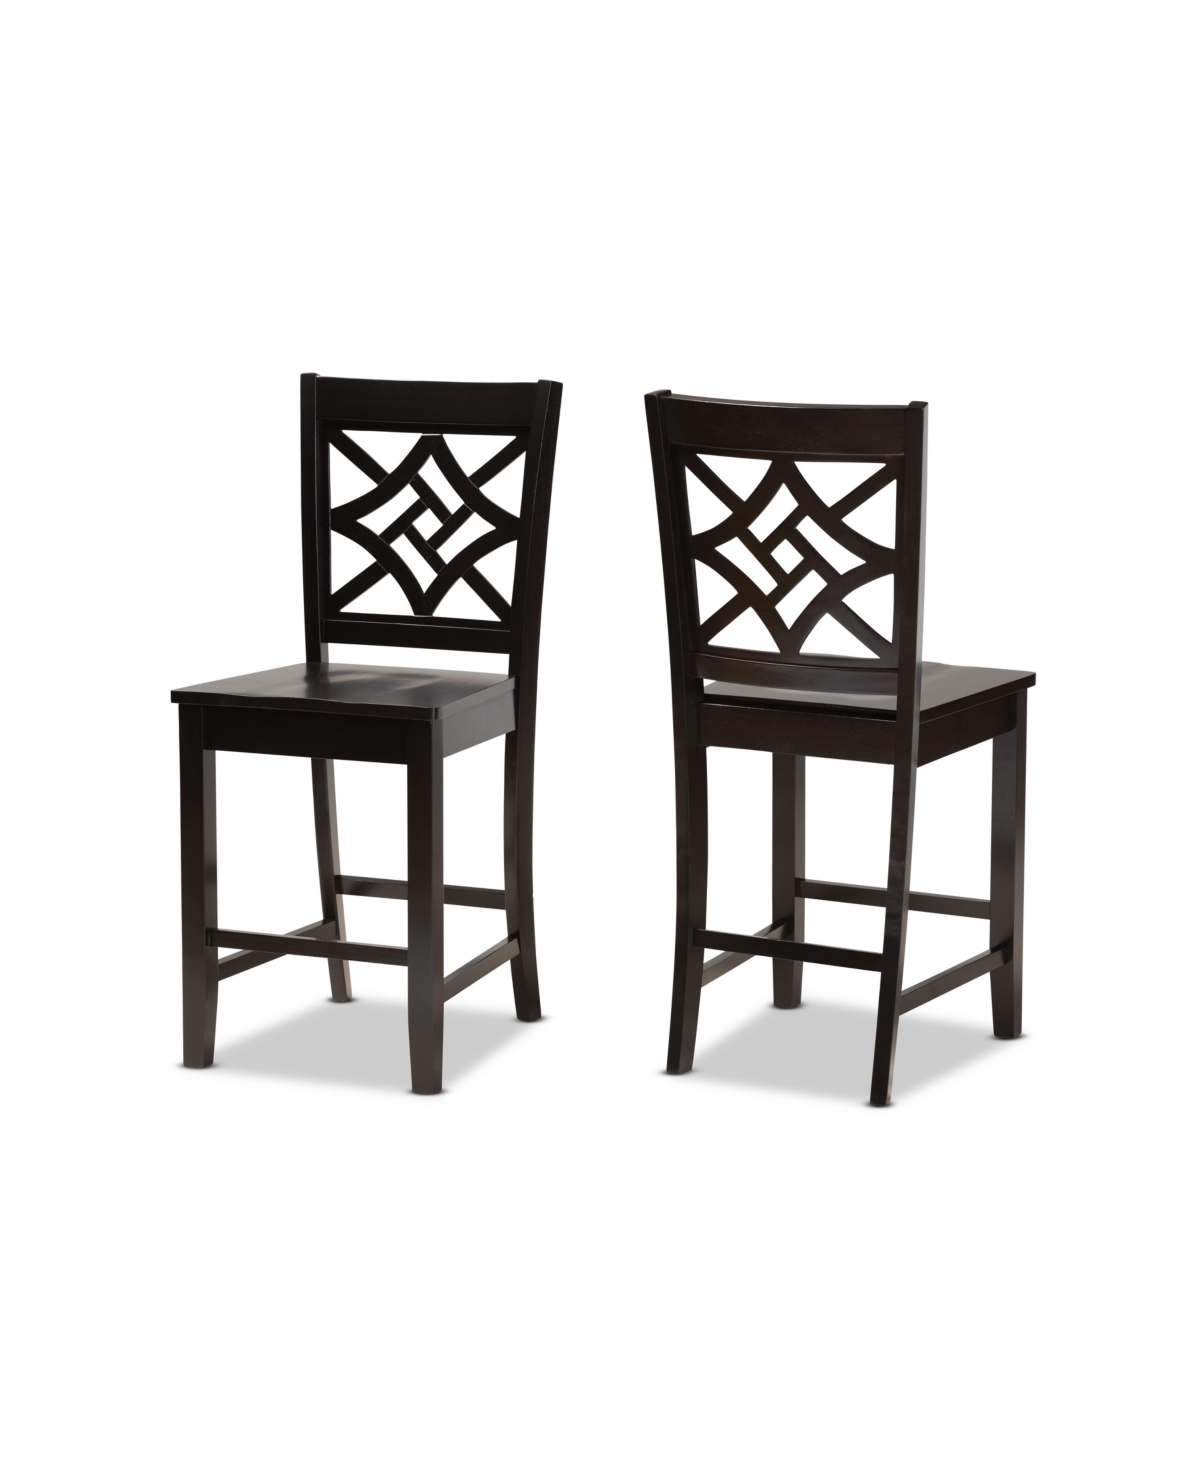 Baxton Studio Nicolette Modern And Contemporary Transitional Wood Counter Stool Set, 2 Piece In Dark Brown